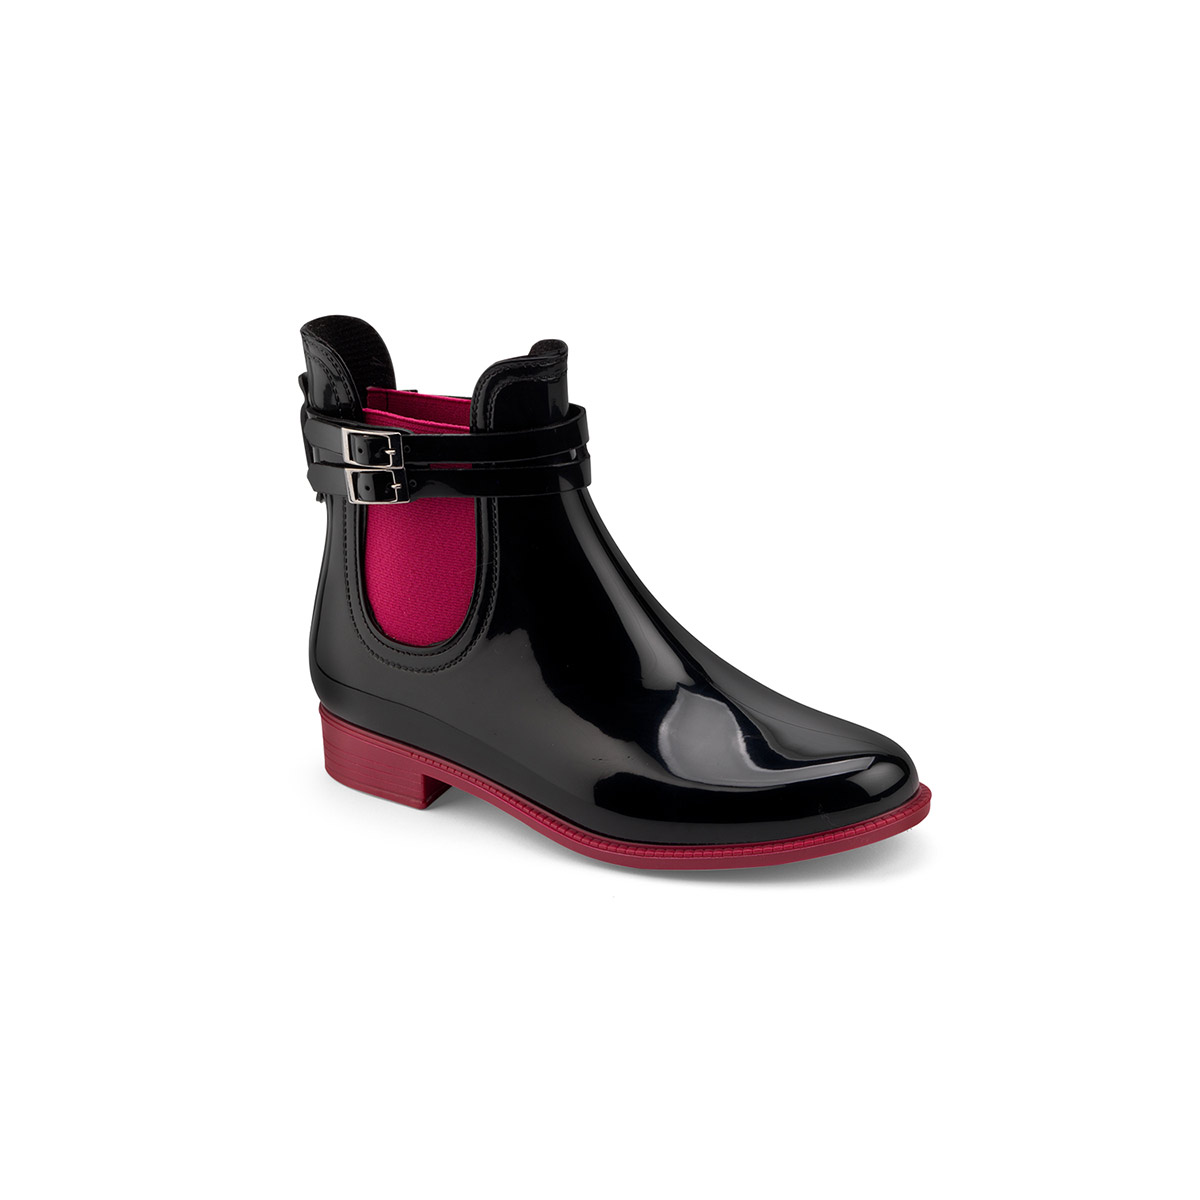 Two-colour chelsea rain boot with double strap